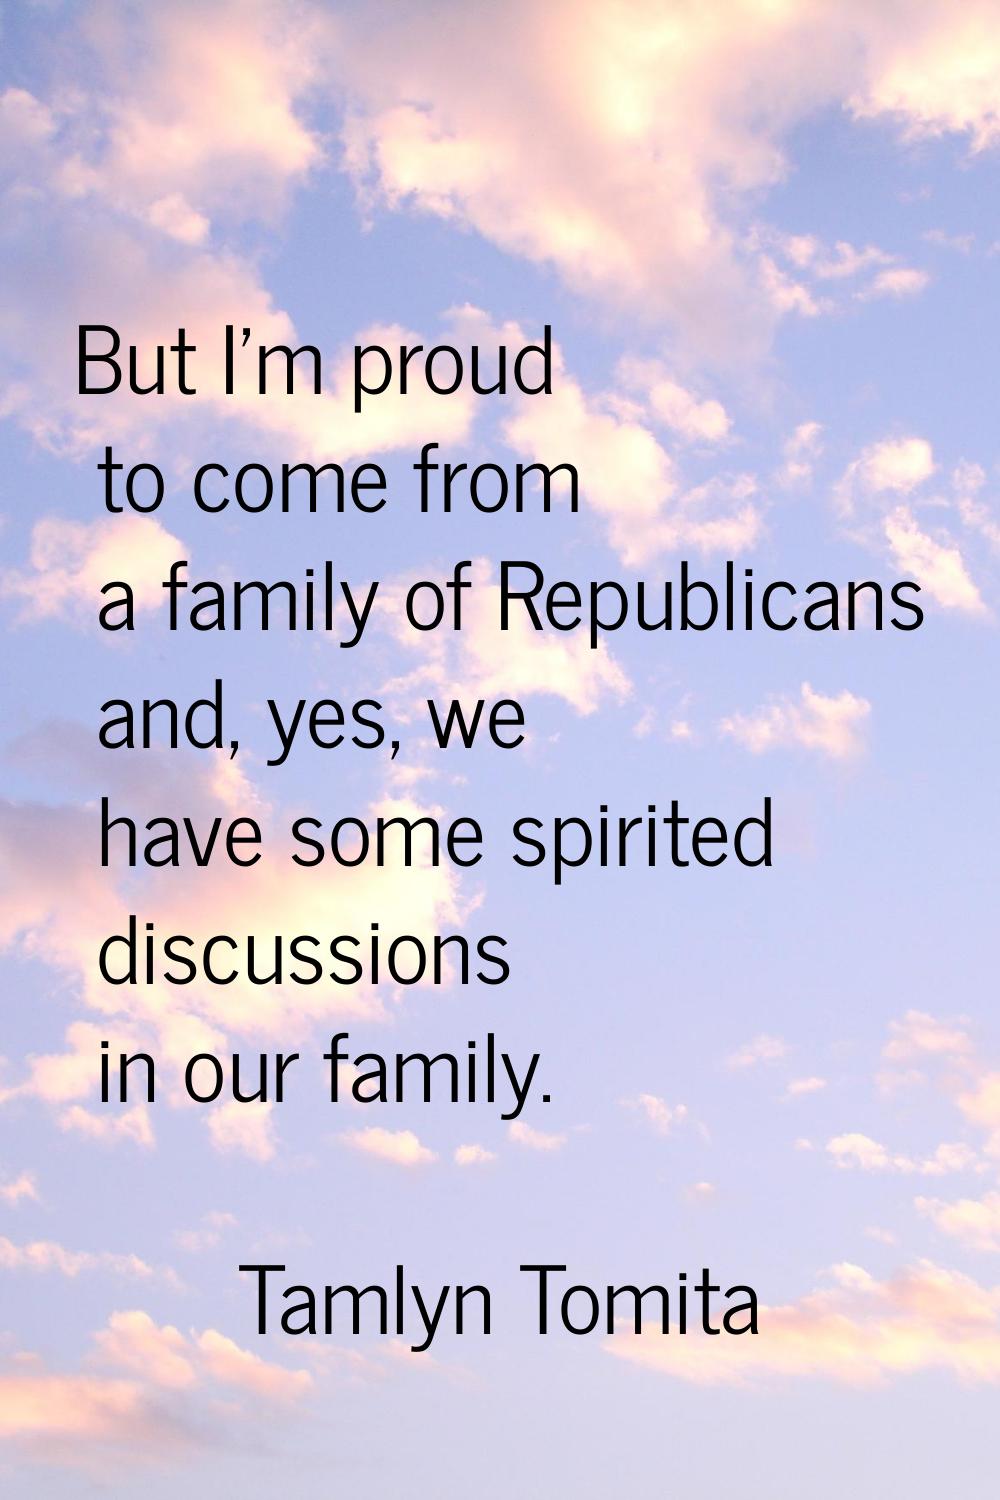 But I'm proud to come from a family of Republicans and, yes, we have some spirited discussions in o